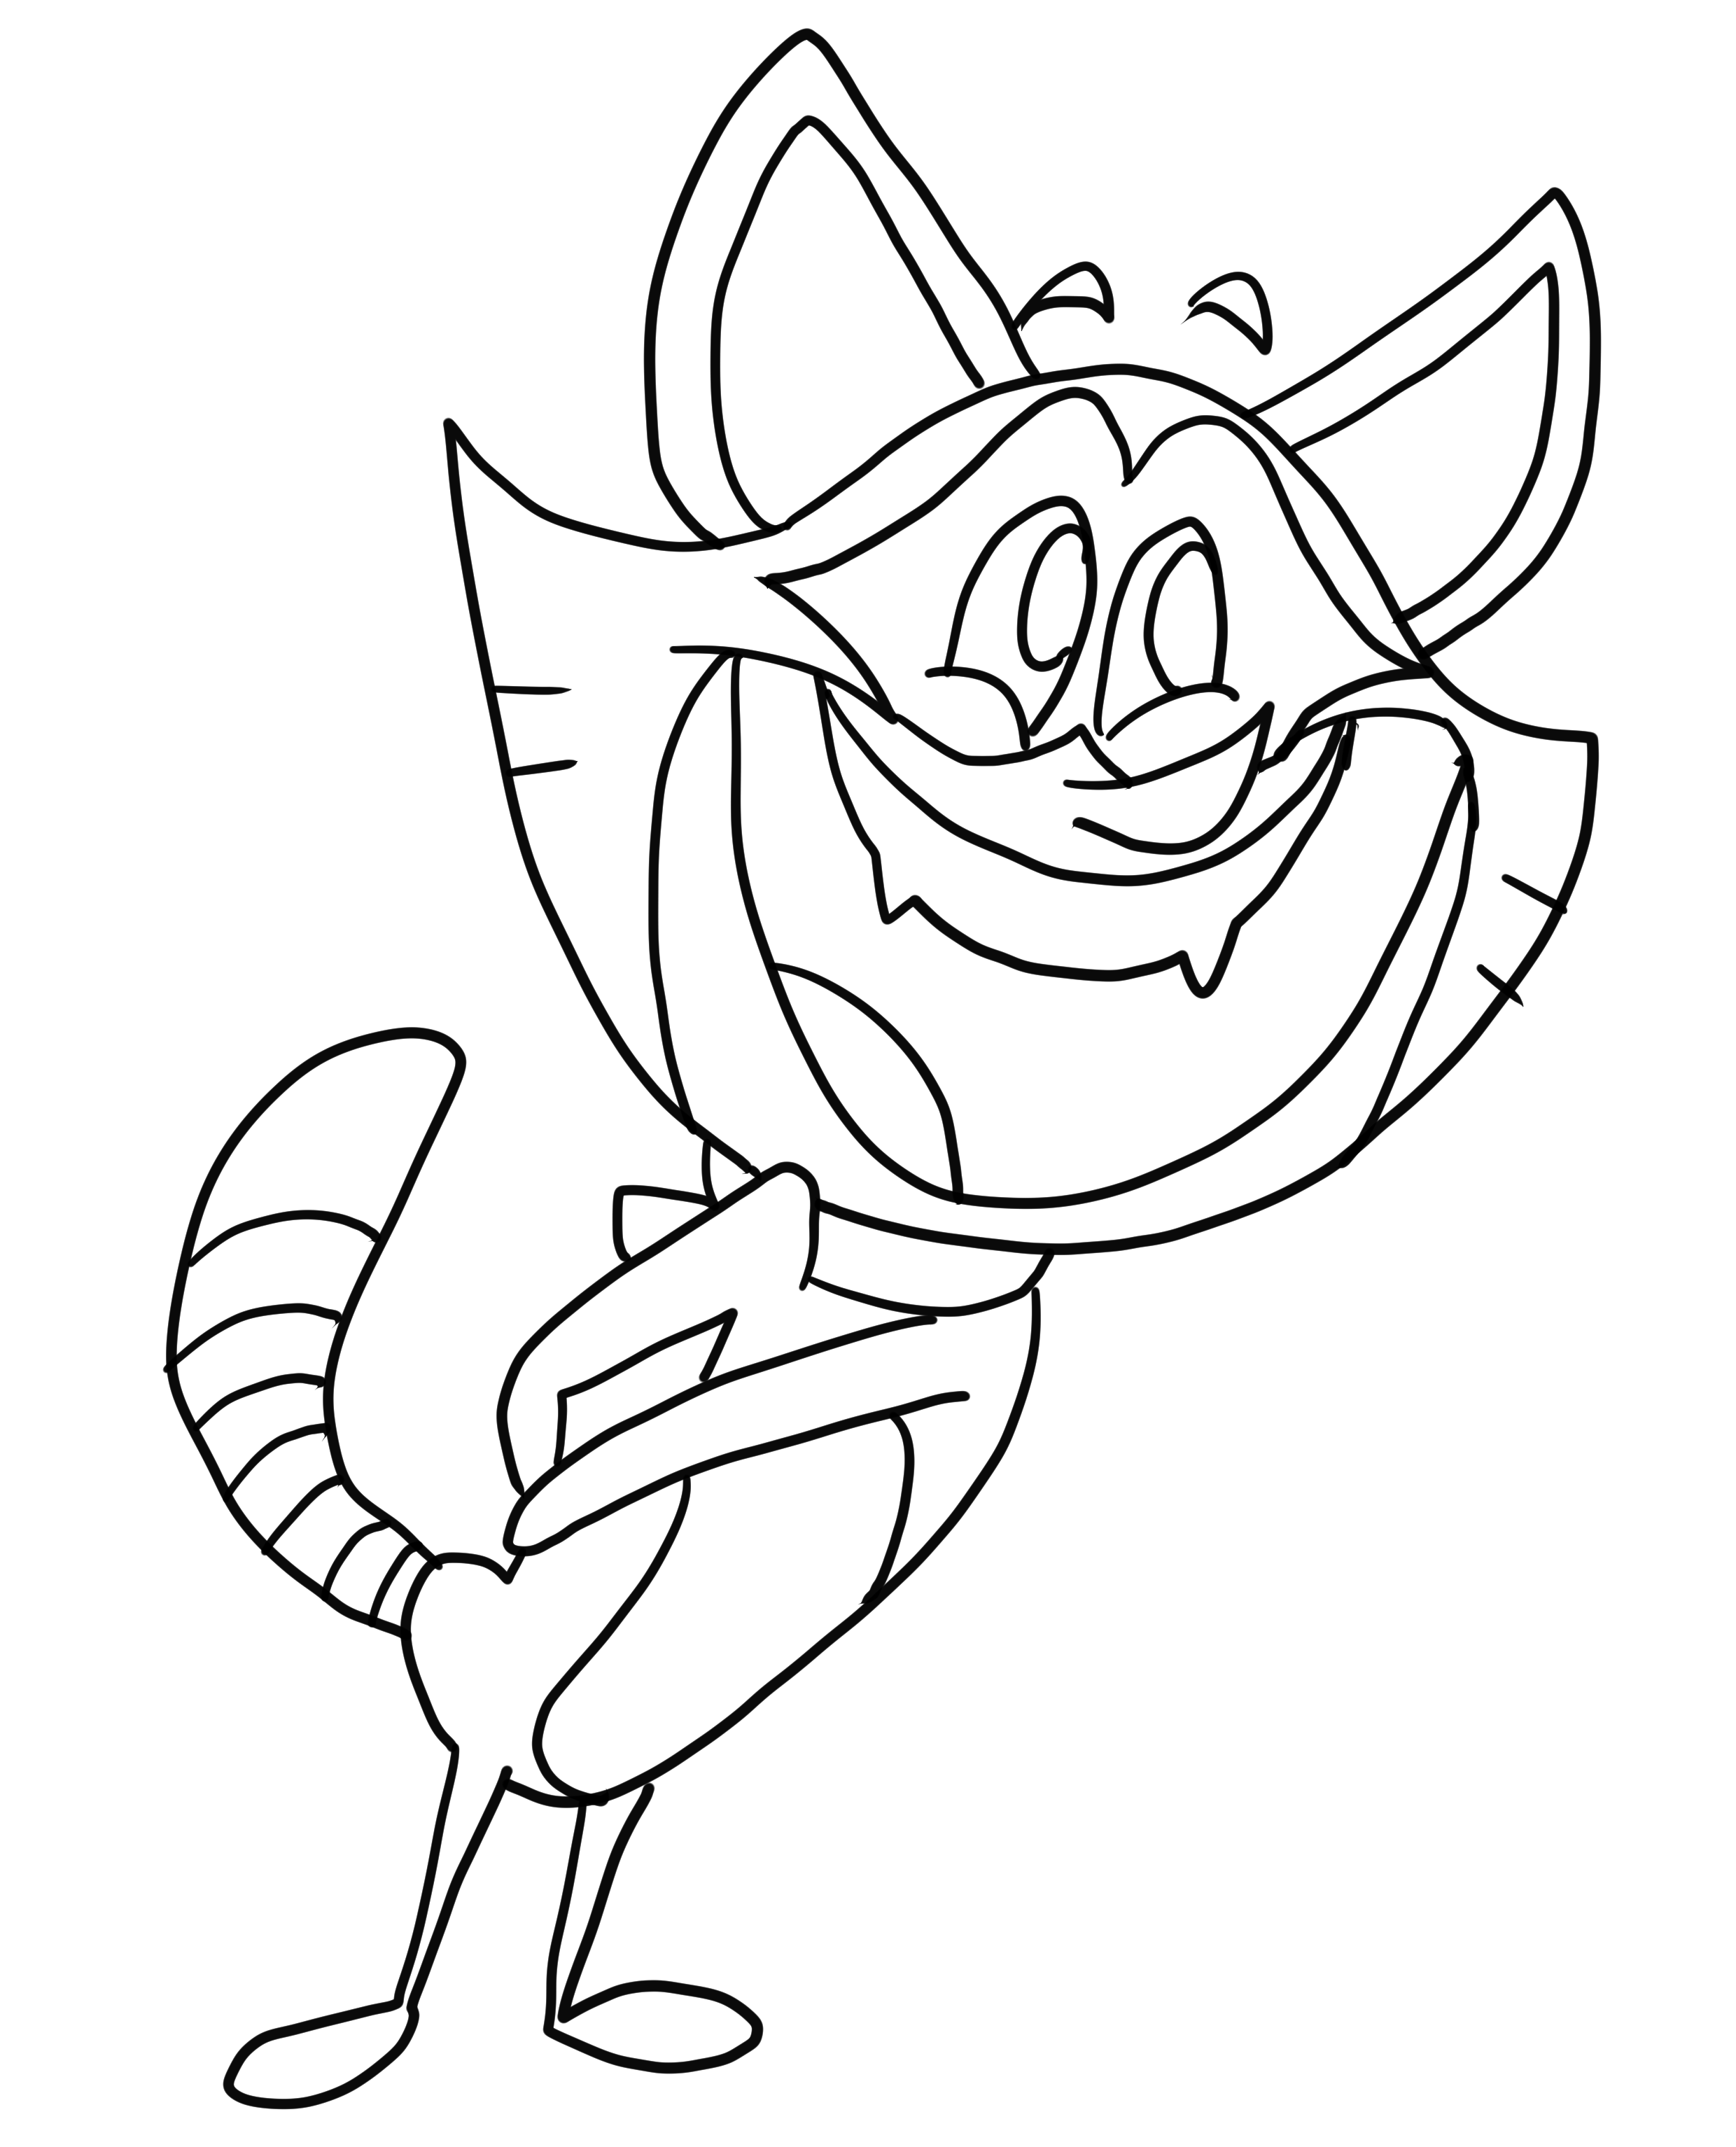 Drawing of Taffy 04 from Taffy to print and color